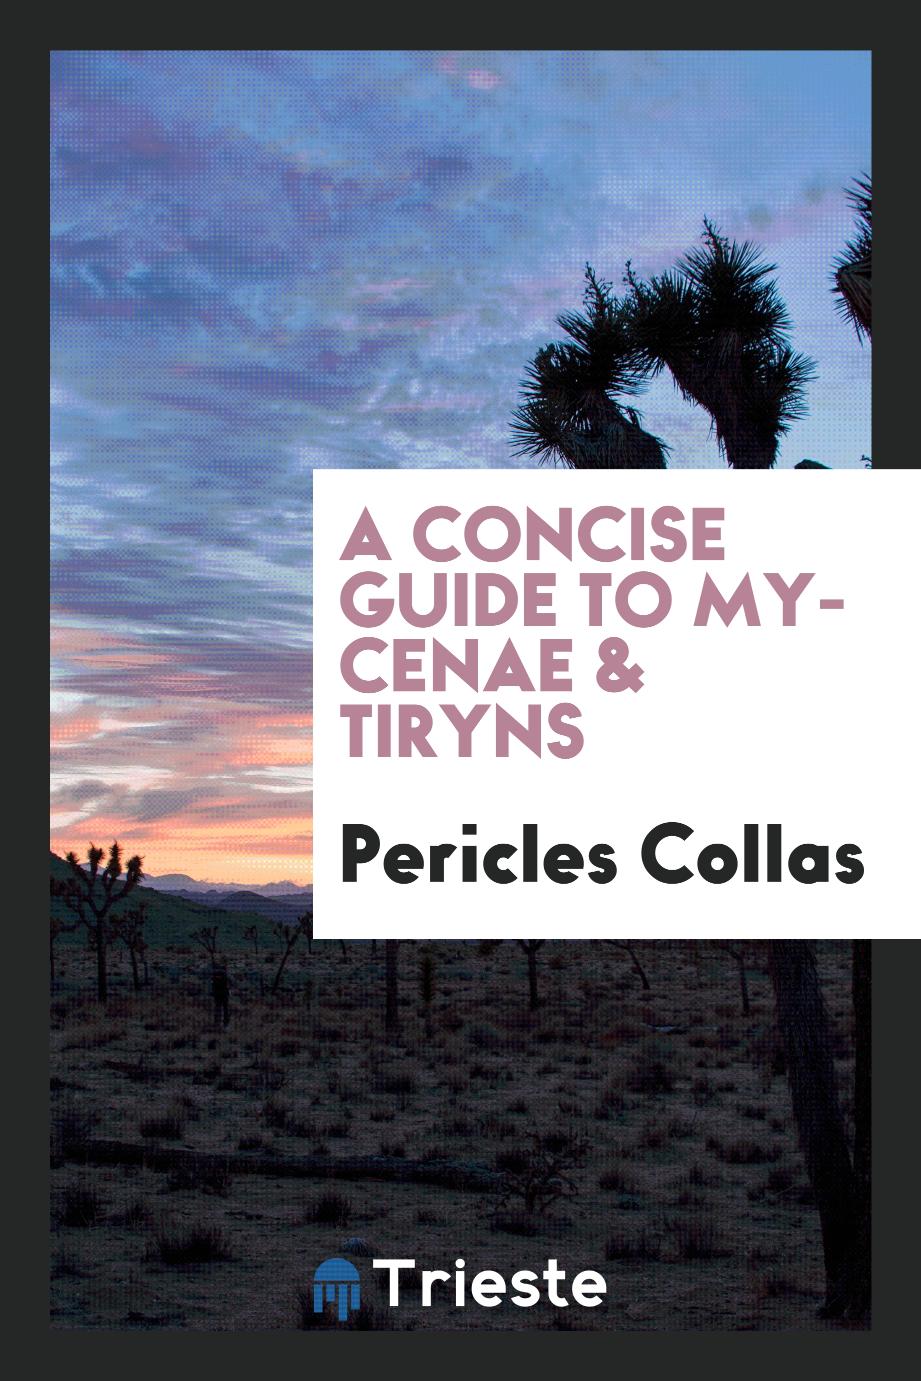 Pericles Collas - A concise guide to Mycenae & Tiryns